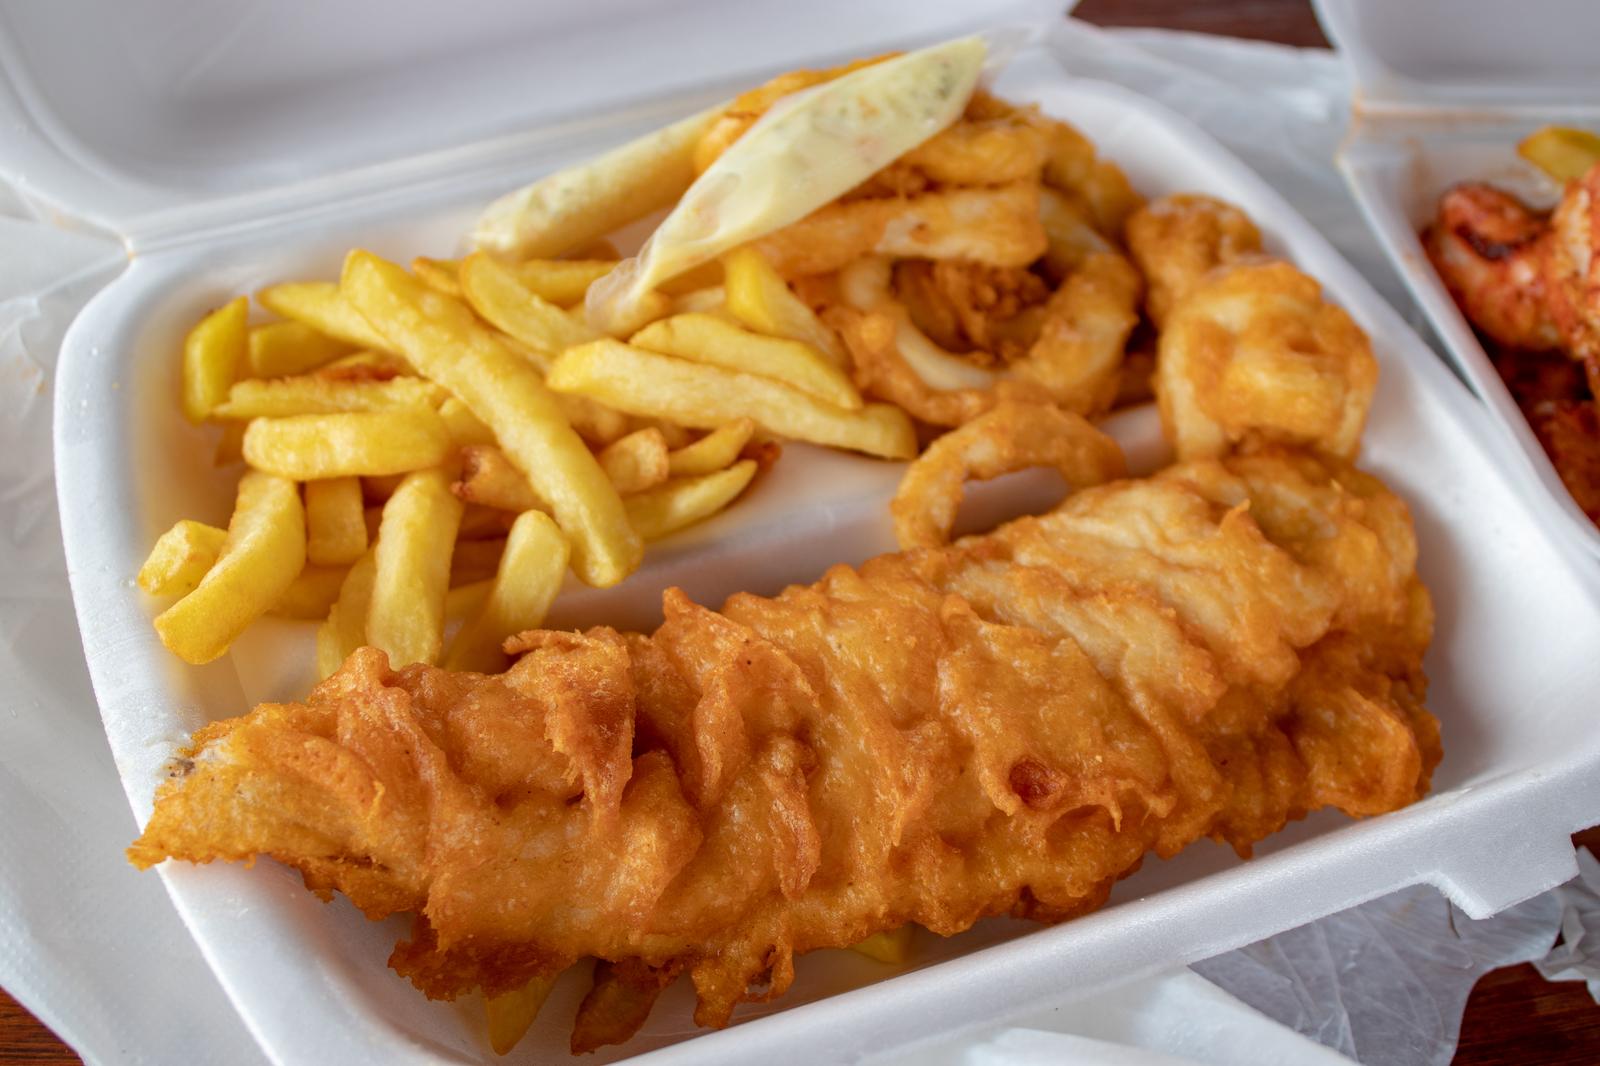 Plan a Trip to London If You Want to Know When You’ll Meet Your Soulmate ❤️ Fish and chips